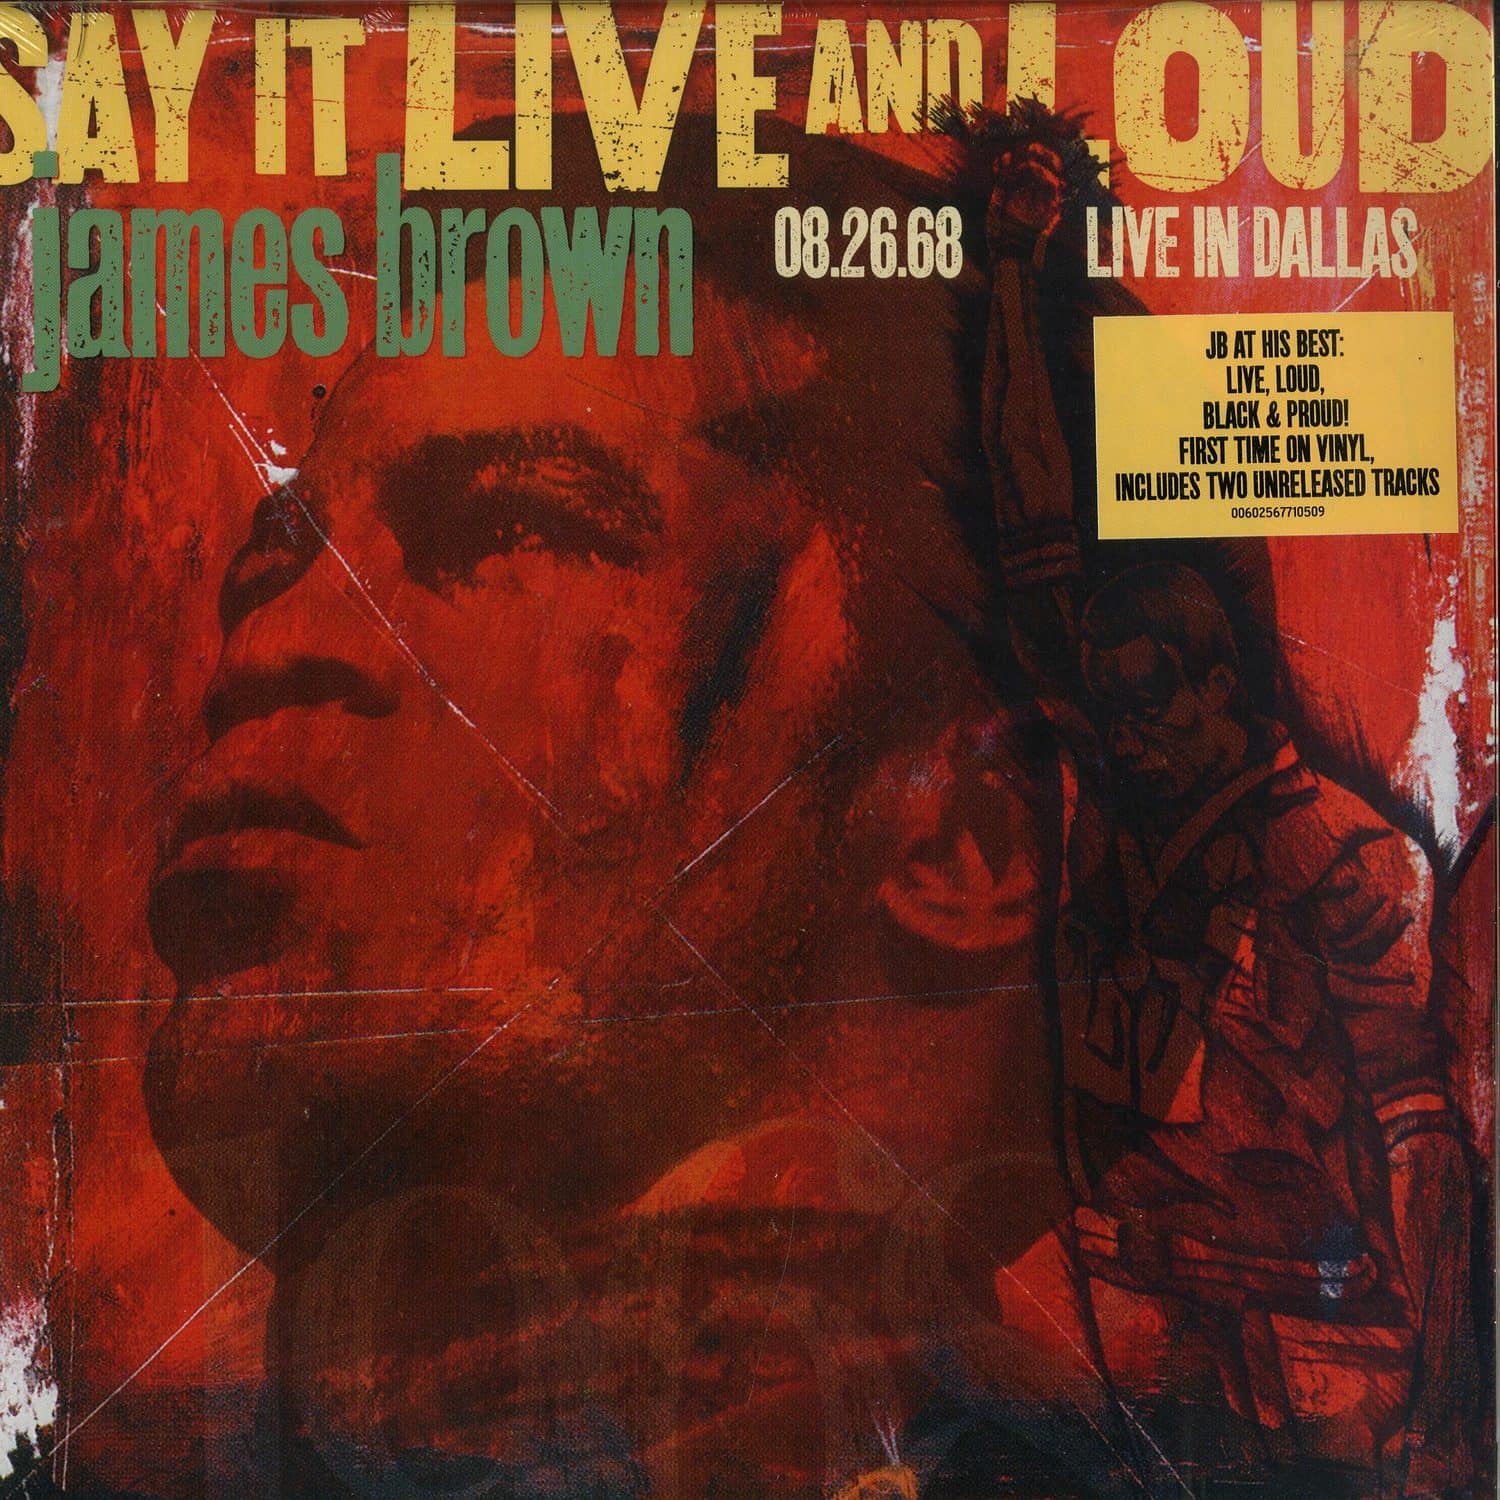 James Brown - SAY IT LIVE AND LOUD: LIVE IN DALLAS 